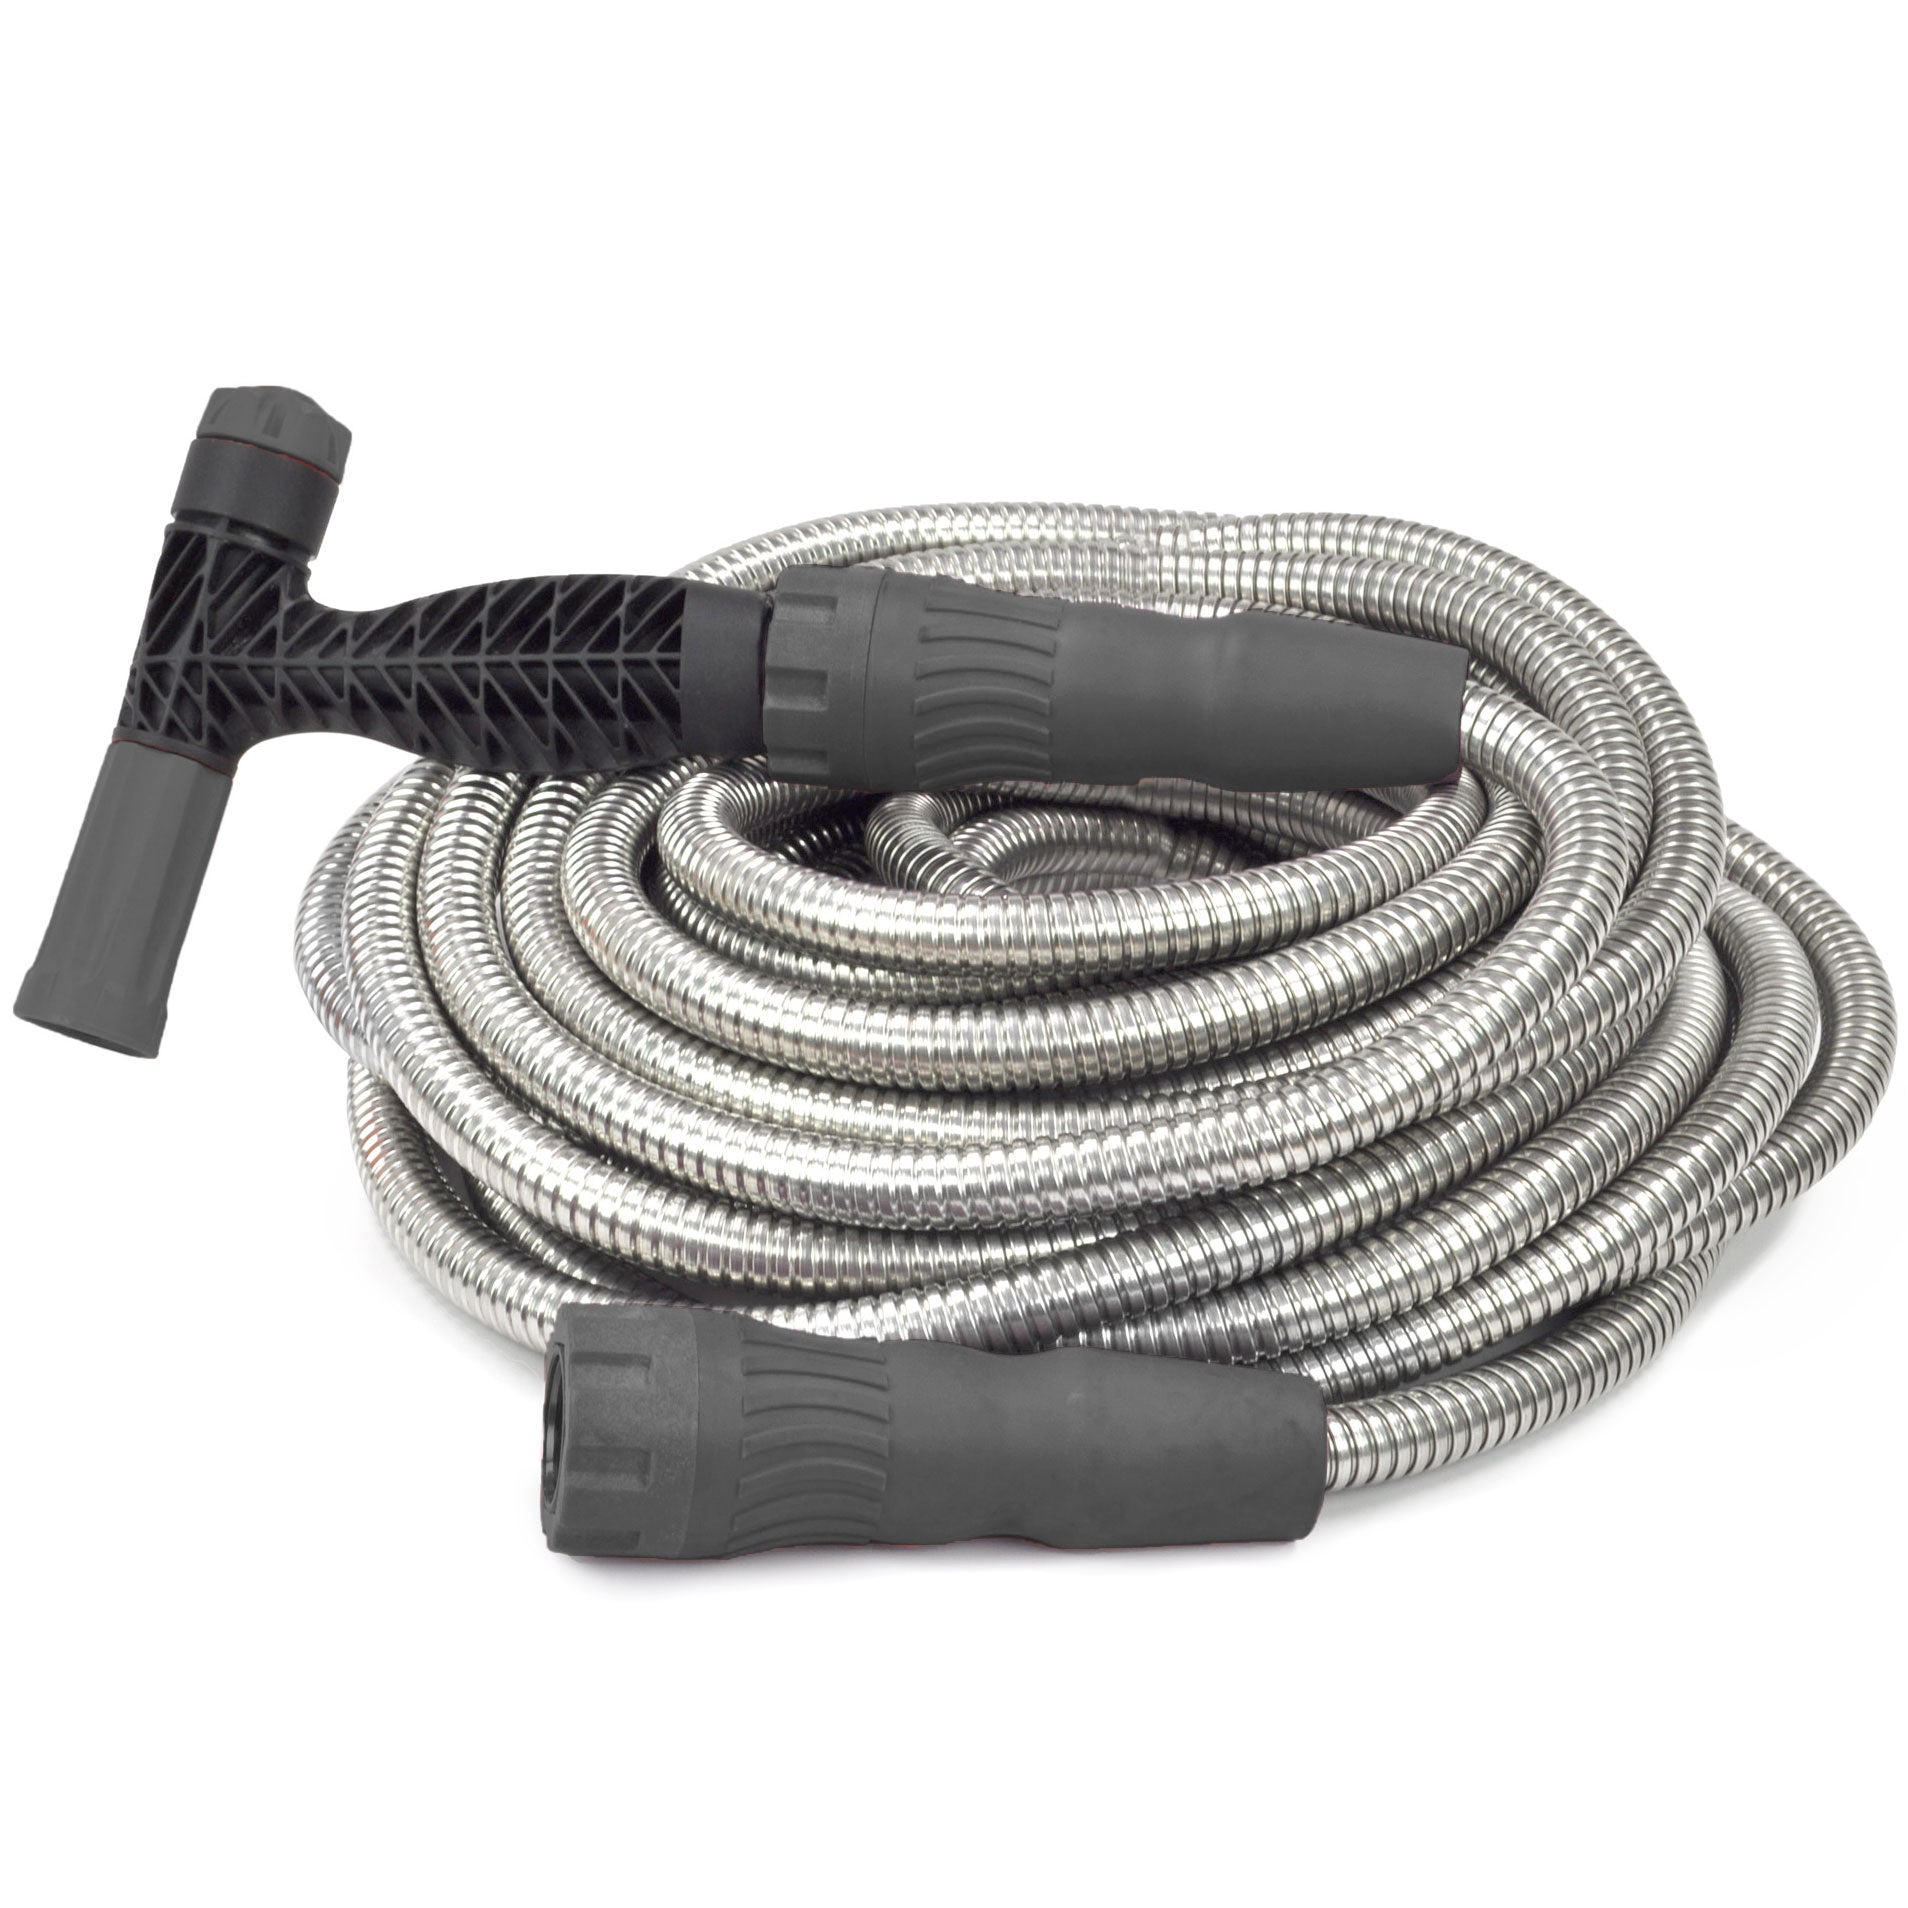 Bernini 75' Expanding Metal Garden Hose with 2-in-1 Nozzle ,Grey